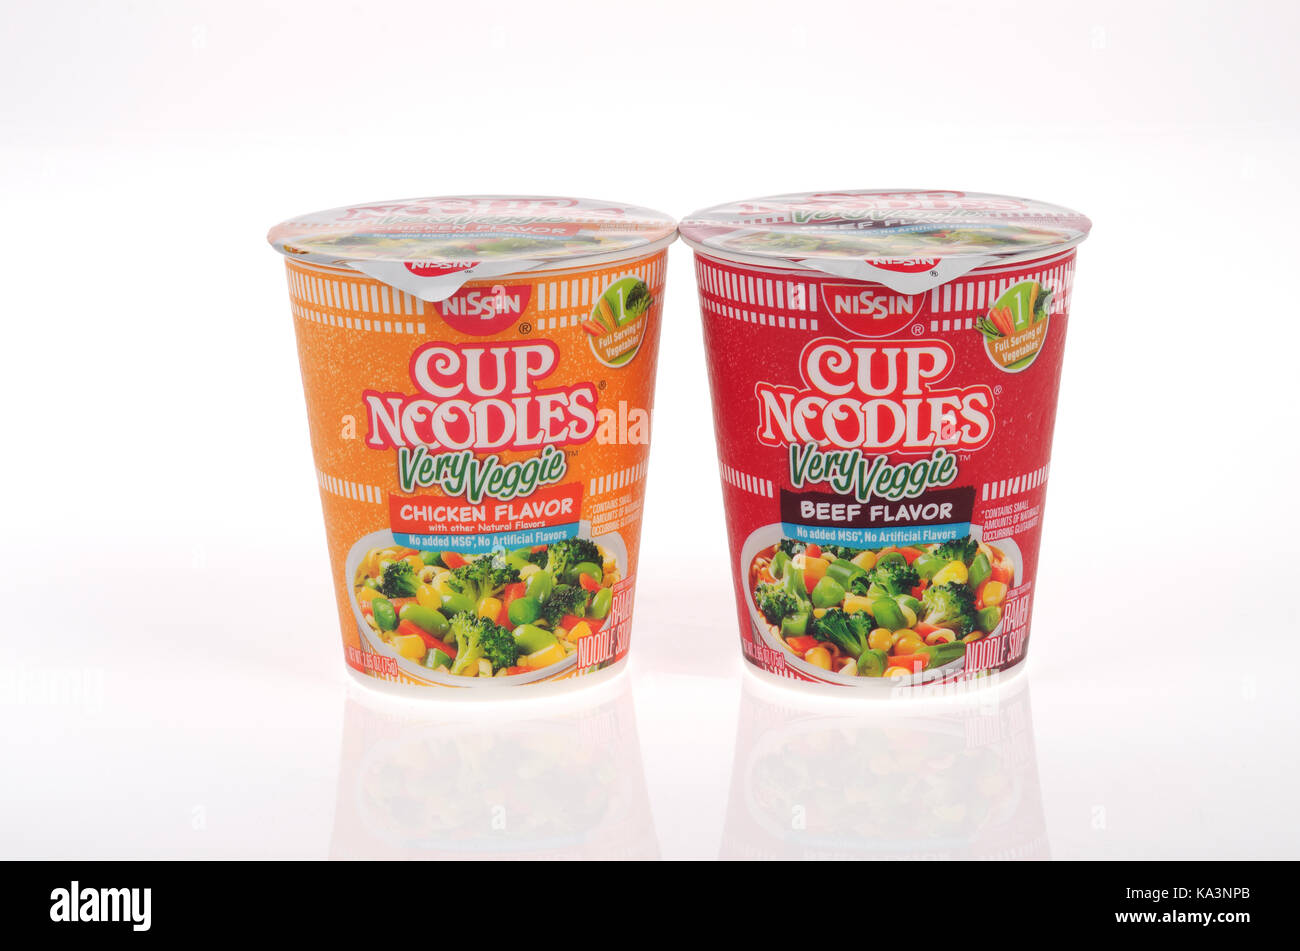 Unopened containers of Nissin Cup Noodles Very Veggie chicken flavor and beef flavor on white background, isolated USA. Stock Photo